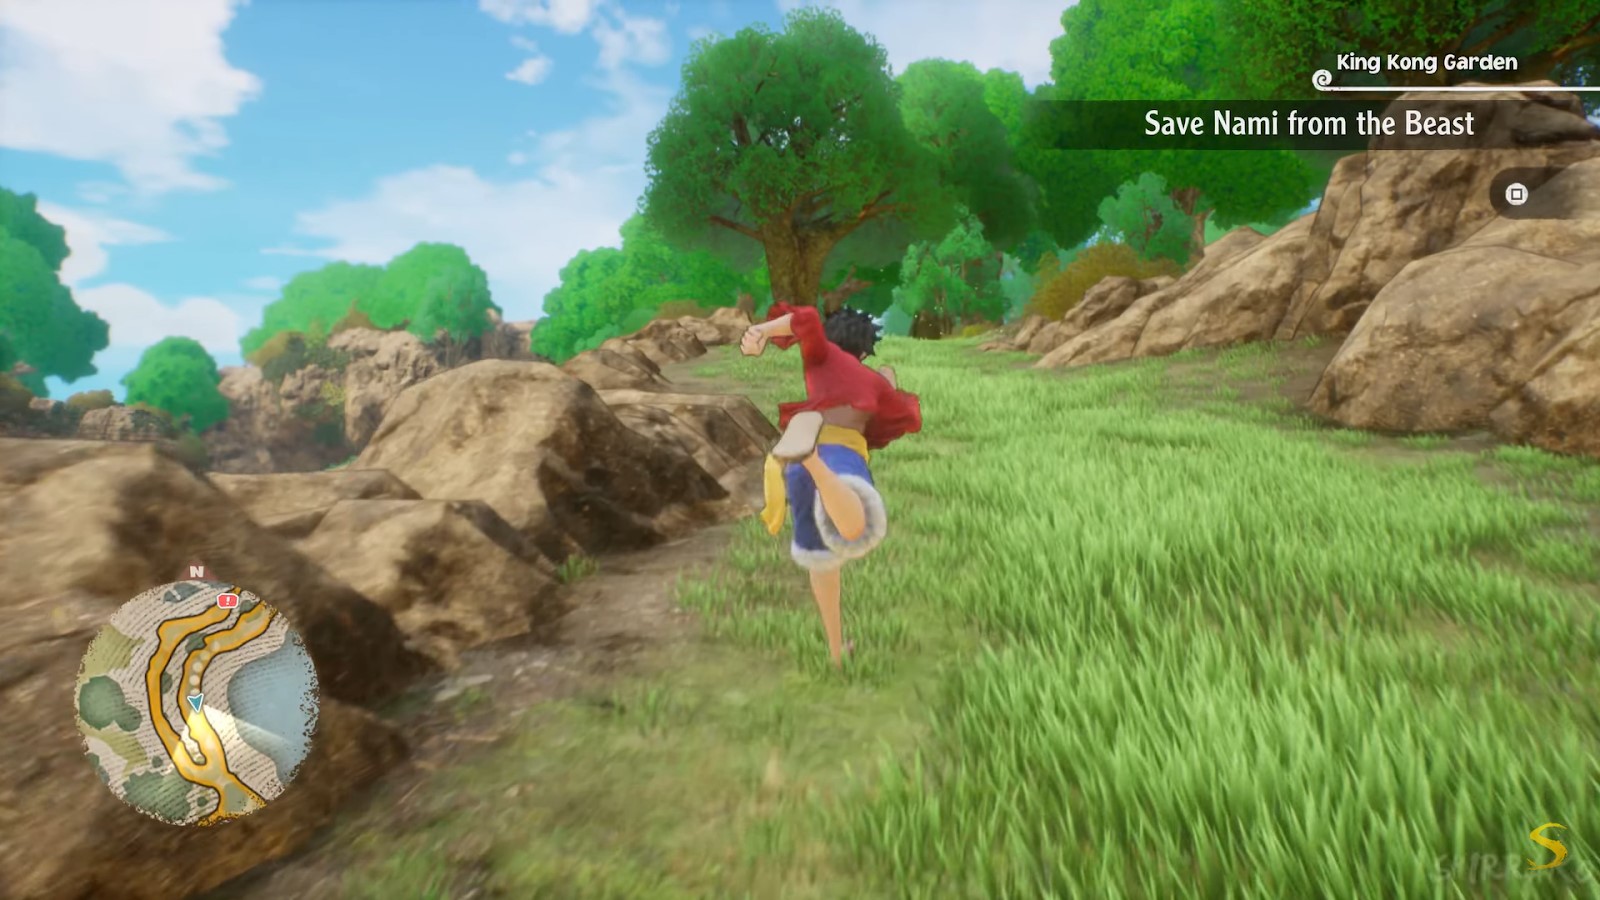 Open world to explore in One Piece Odyssey